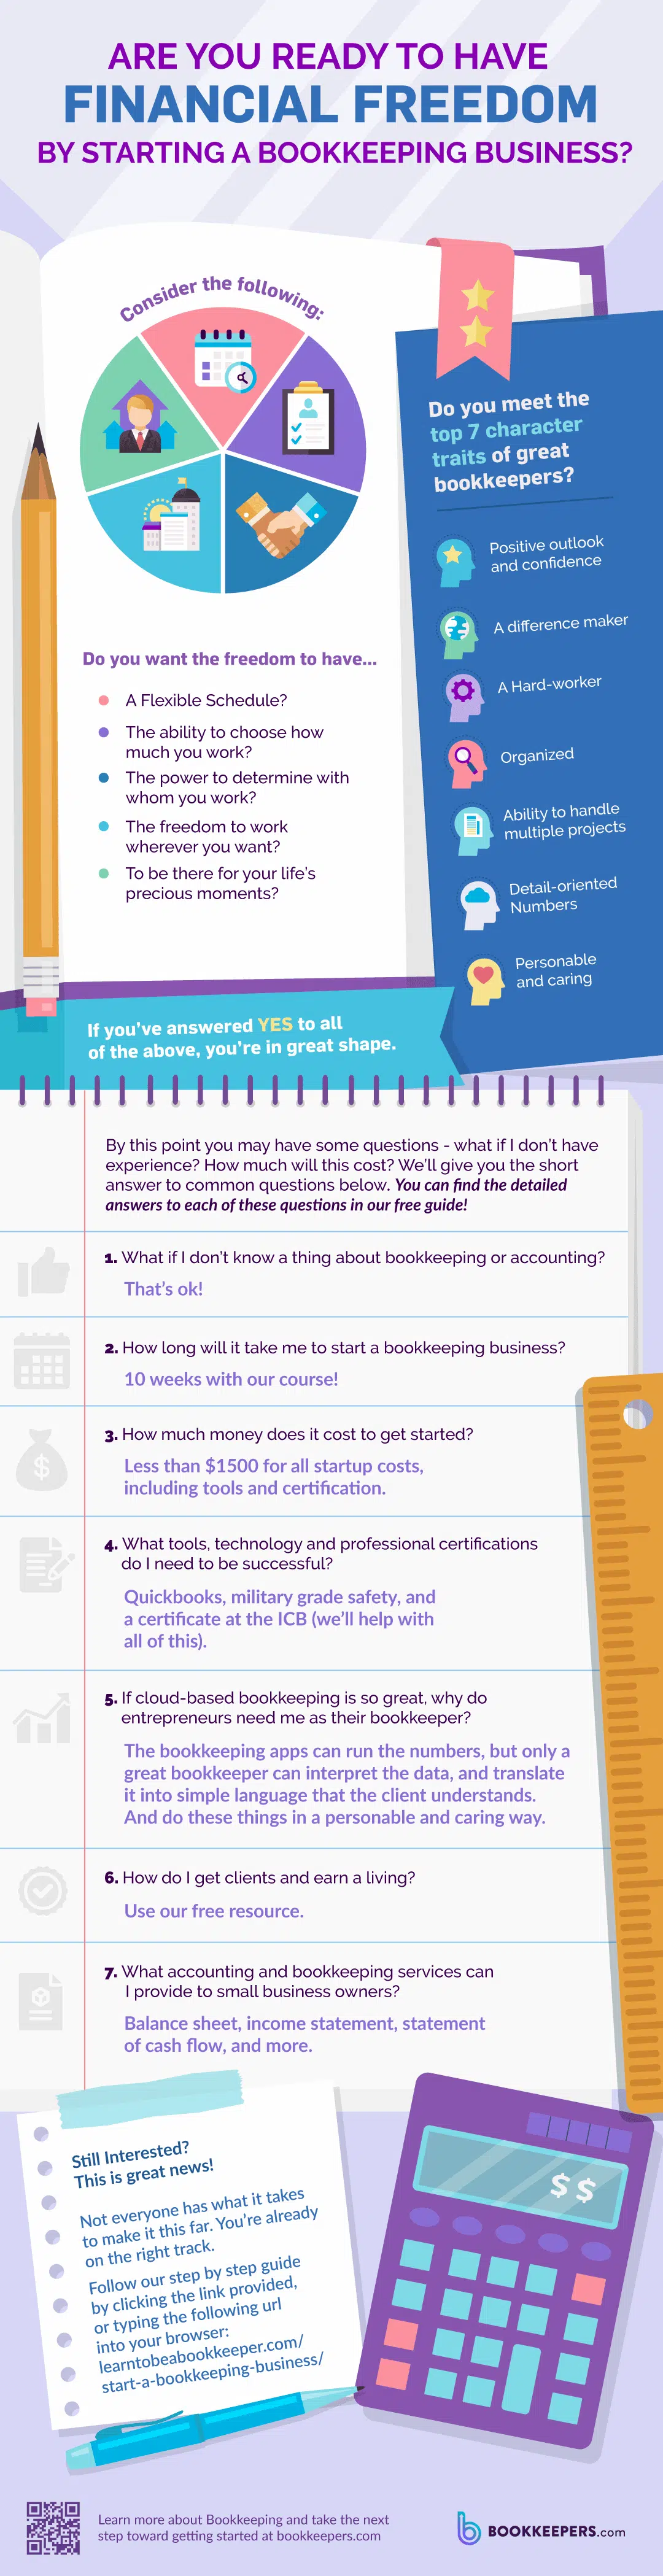 20191120 Bookkeeper Starting A Bookkeeping Business